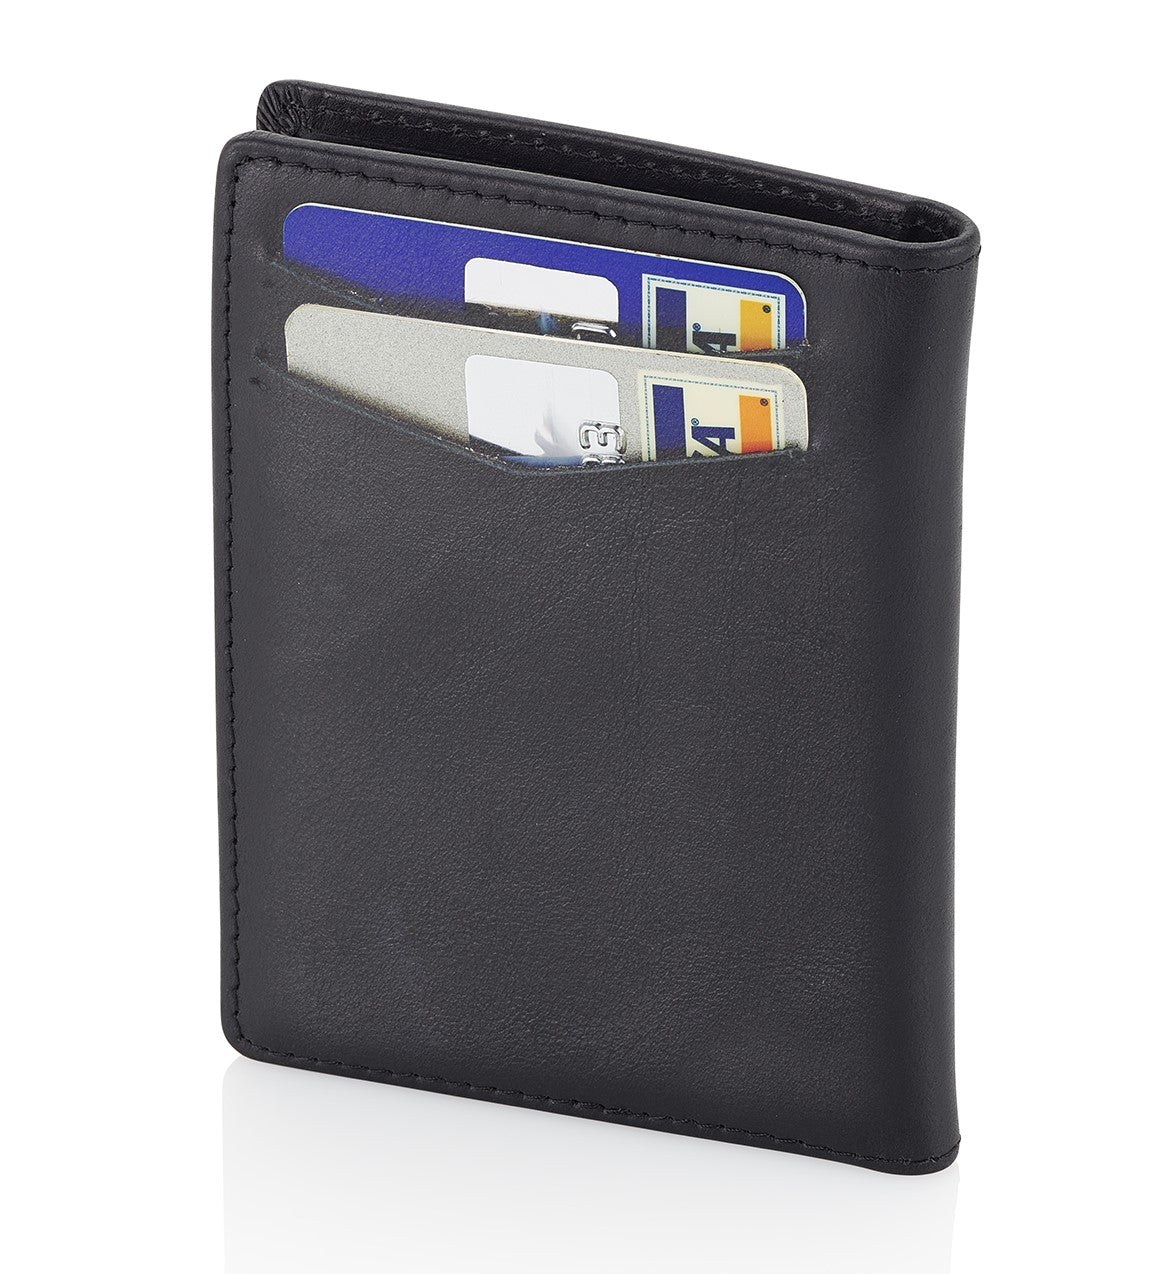 Men's Slim Front Pocket Wallet - RFID Blocking, Thin Minimalist Bifold  Design, Genuine Leather - ID Badge Window and 5 Sleeves for Money, Credit  and